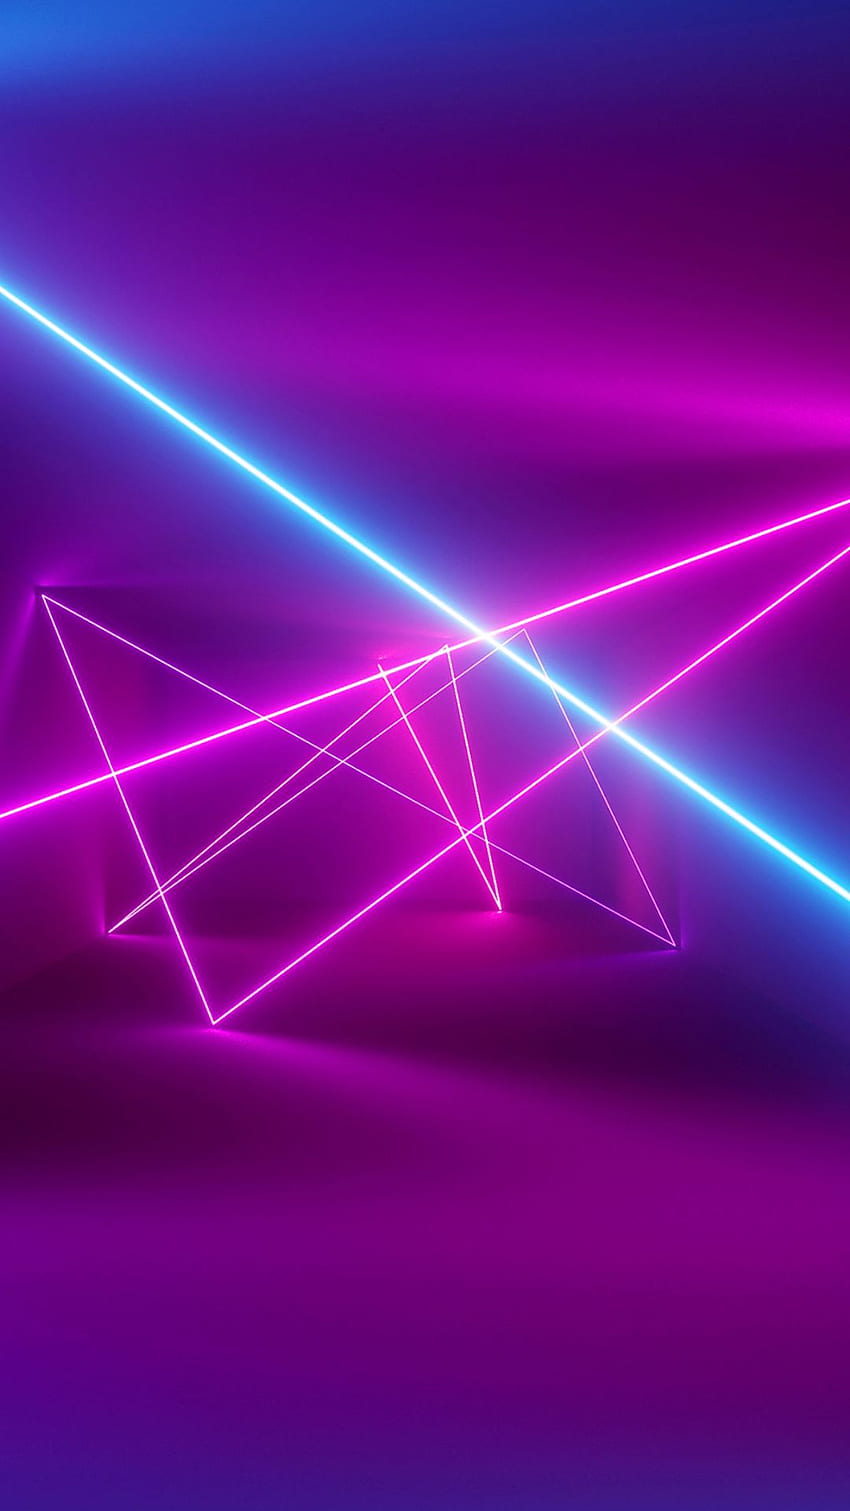 1000 Pink And Blue Neon Pictures  Download Free Images on Unsplash